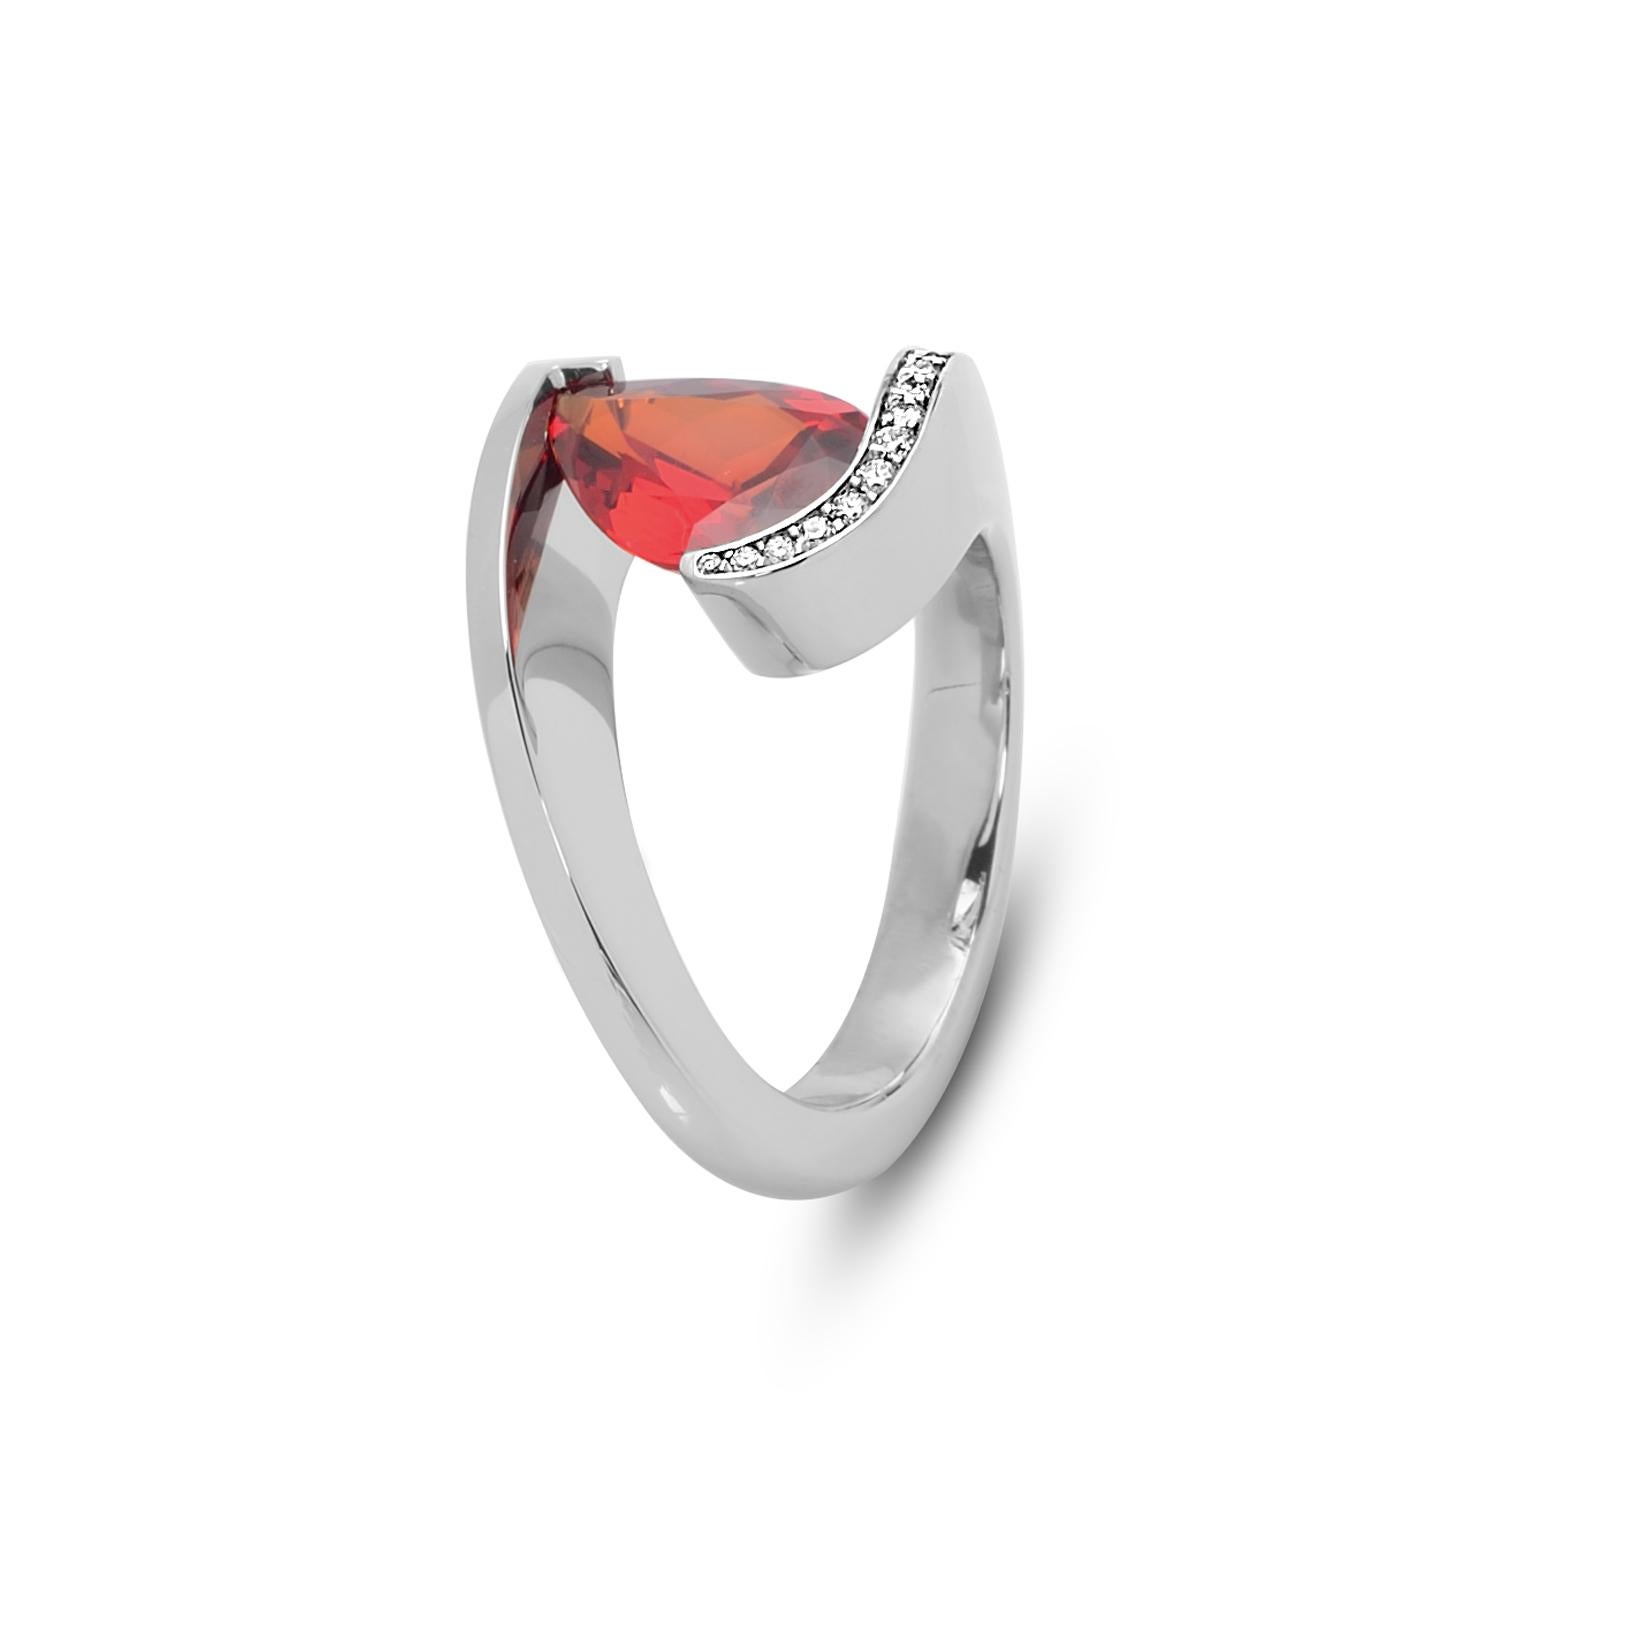 The Steven Kretchmer DP Ring with a tension-set orange sapphire is handcrafted in platinum with a shiny finish. The 2.91 ct. pear shaped sapphire is a vibrant, fiery orange color, beryllium treated and comes with a GIA certificate.  The top of the